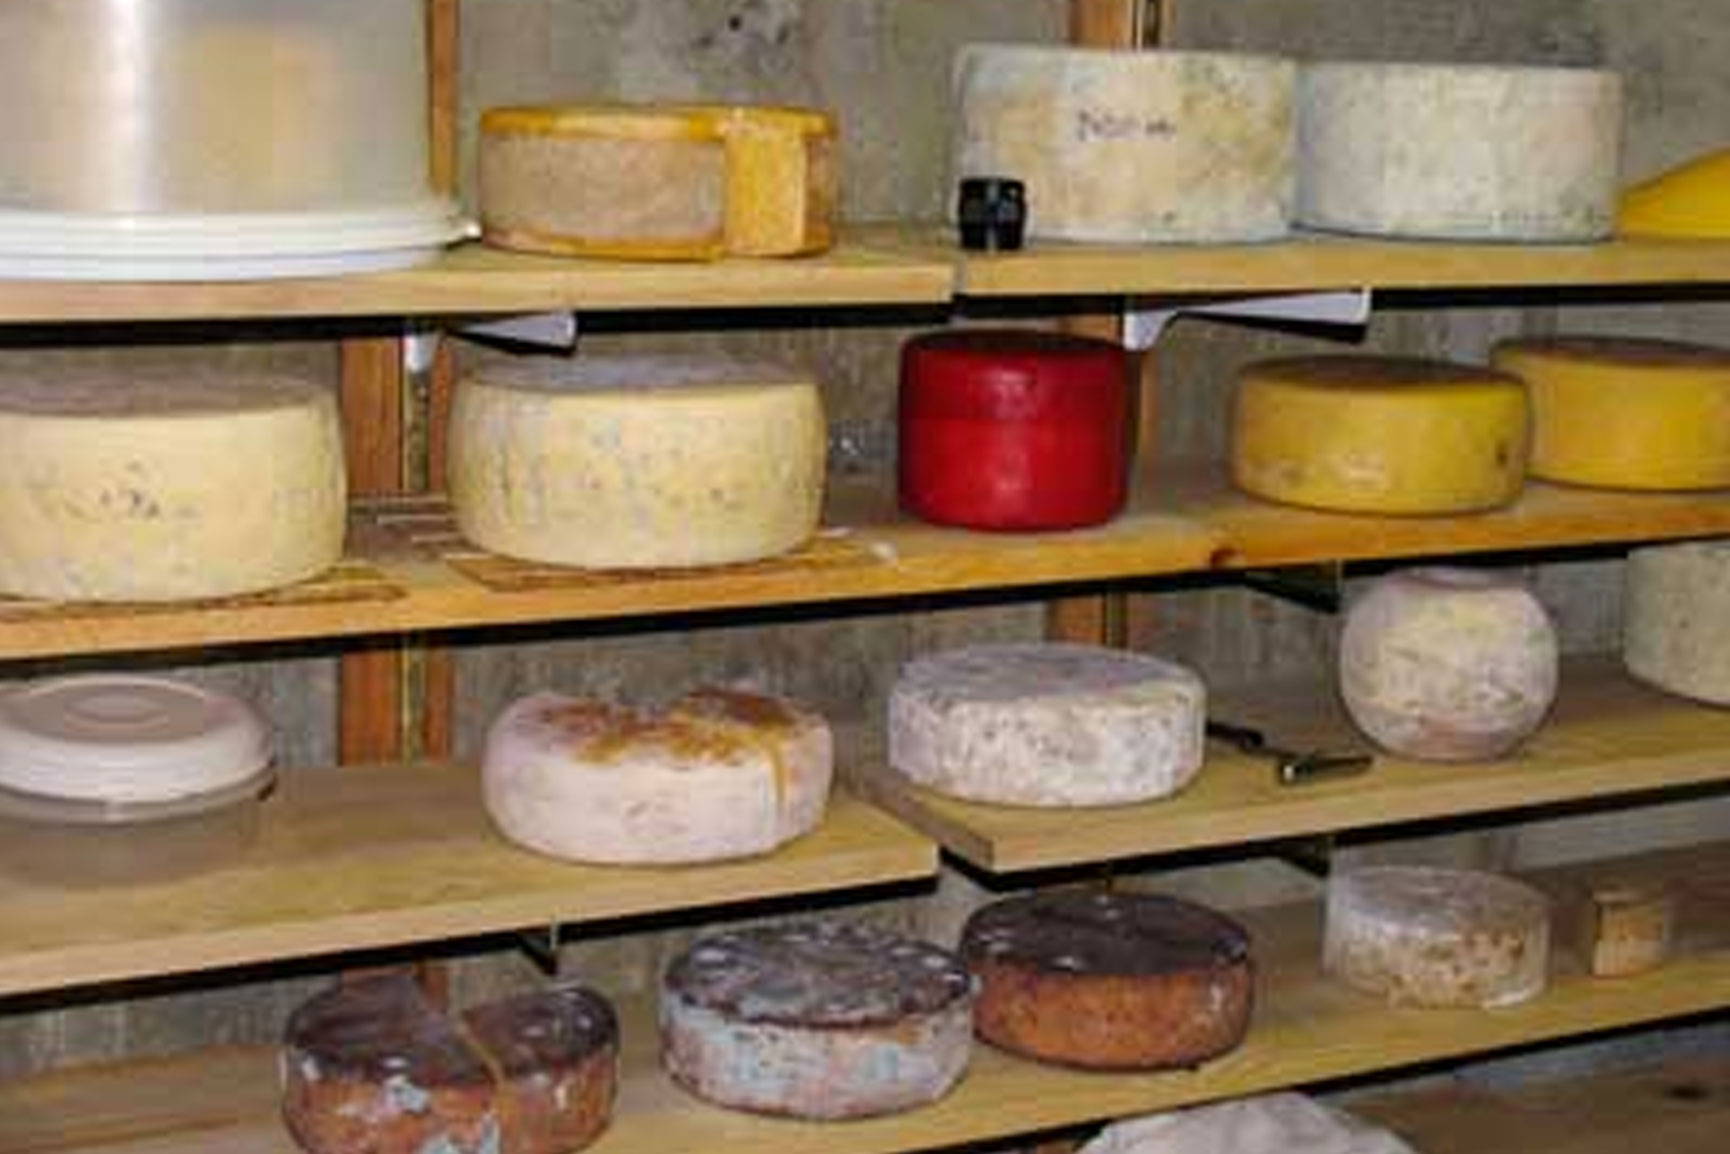 Cheese Storage and Labeling Tips